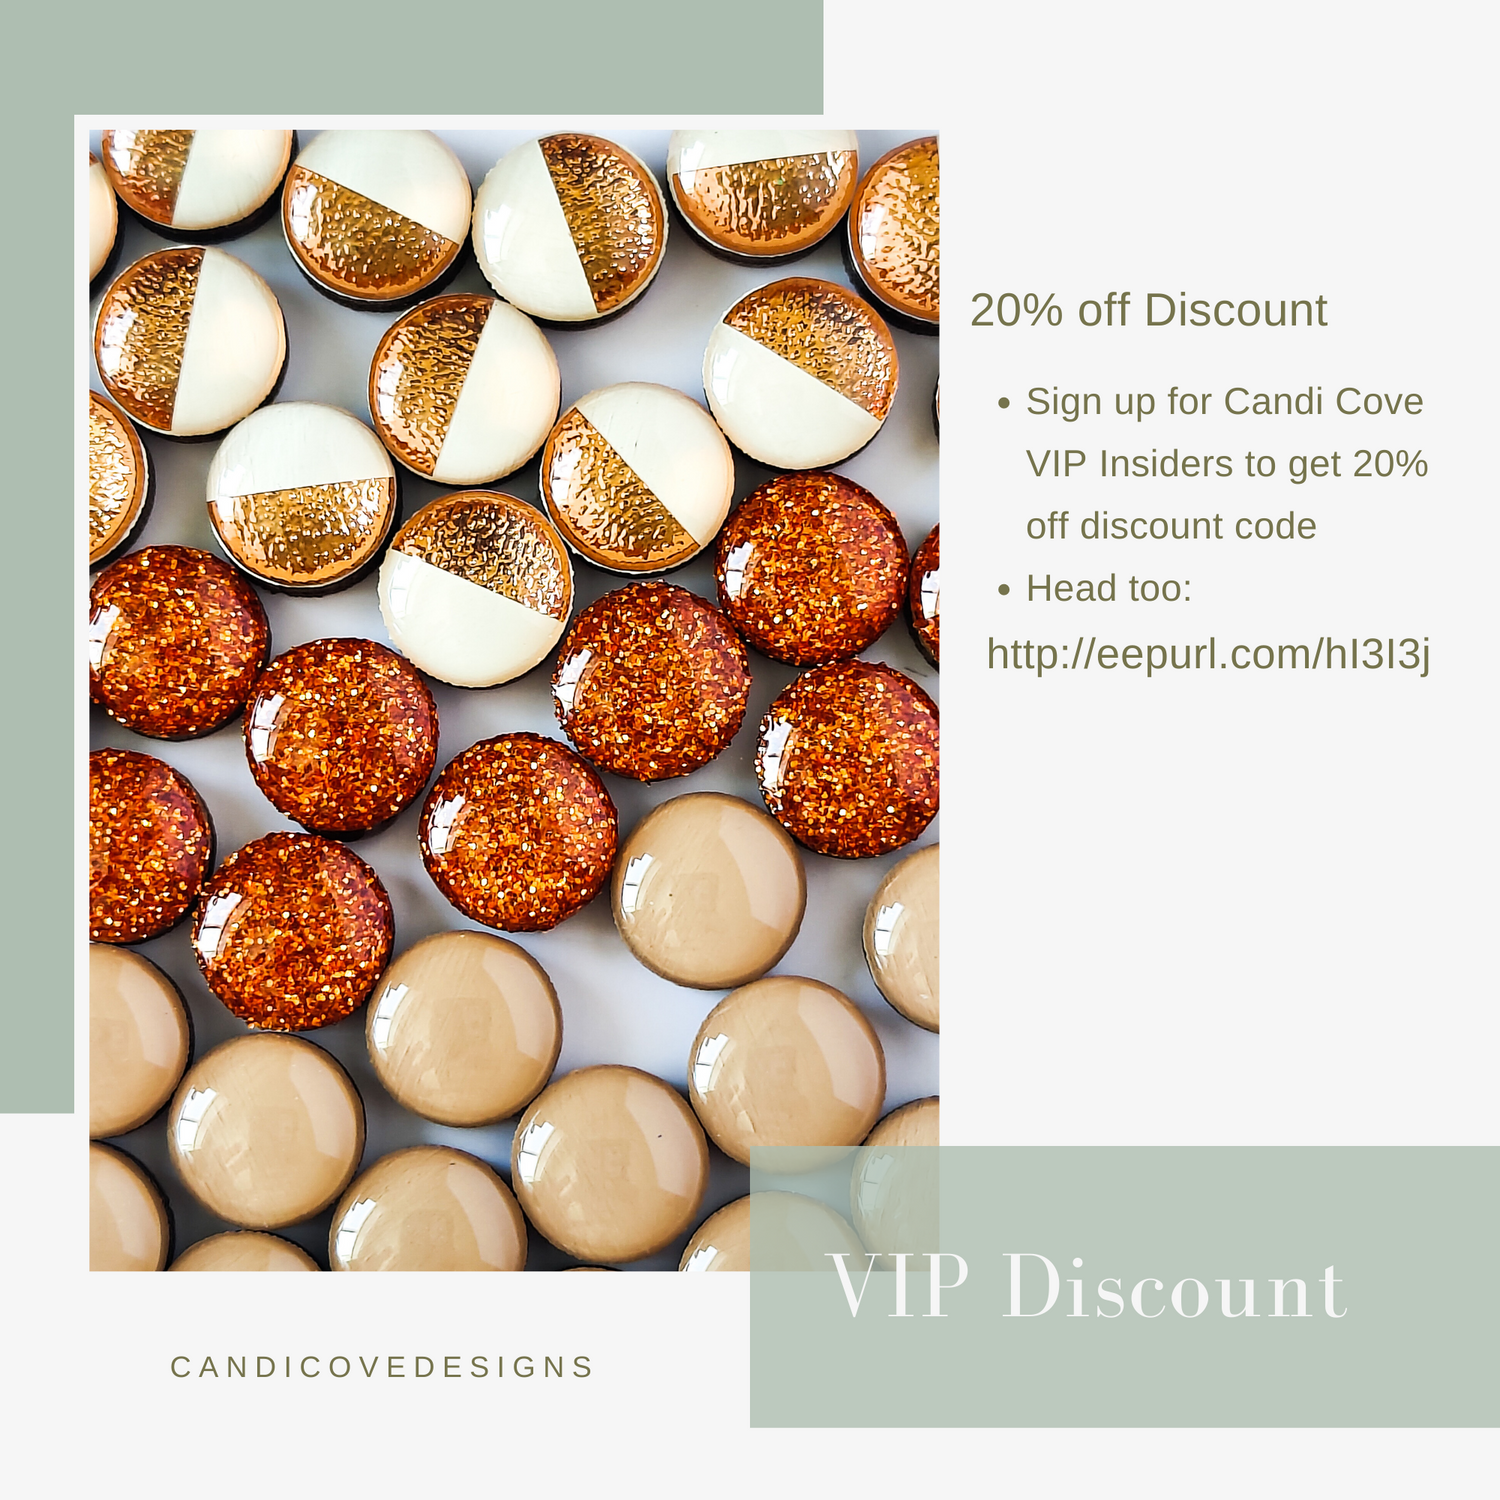 vip discount for candi cove designs stud earrings. 20 percent off discount if you sign up for candi cove designs vip insiders head to http://eepurl.com/hl3l3j terracotta sparkle studs, ivory and rose gold hammered metal studs and driftwood studs